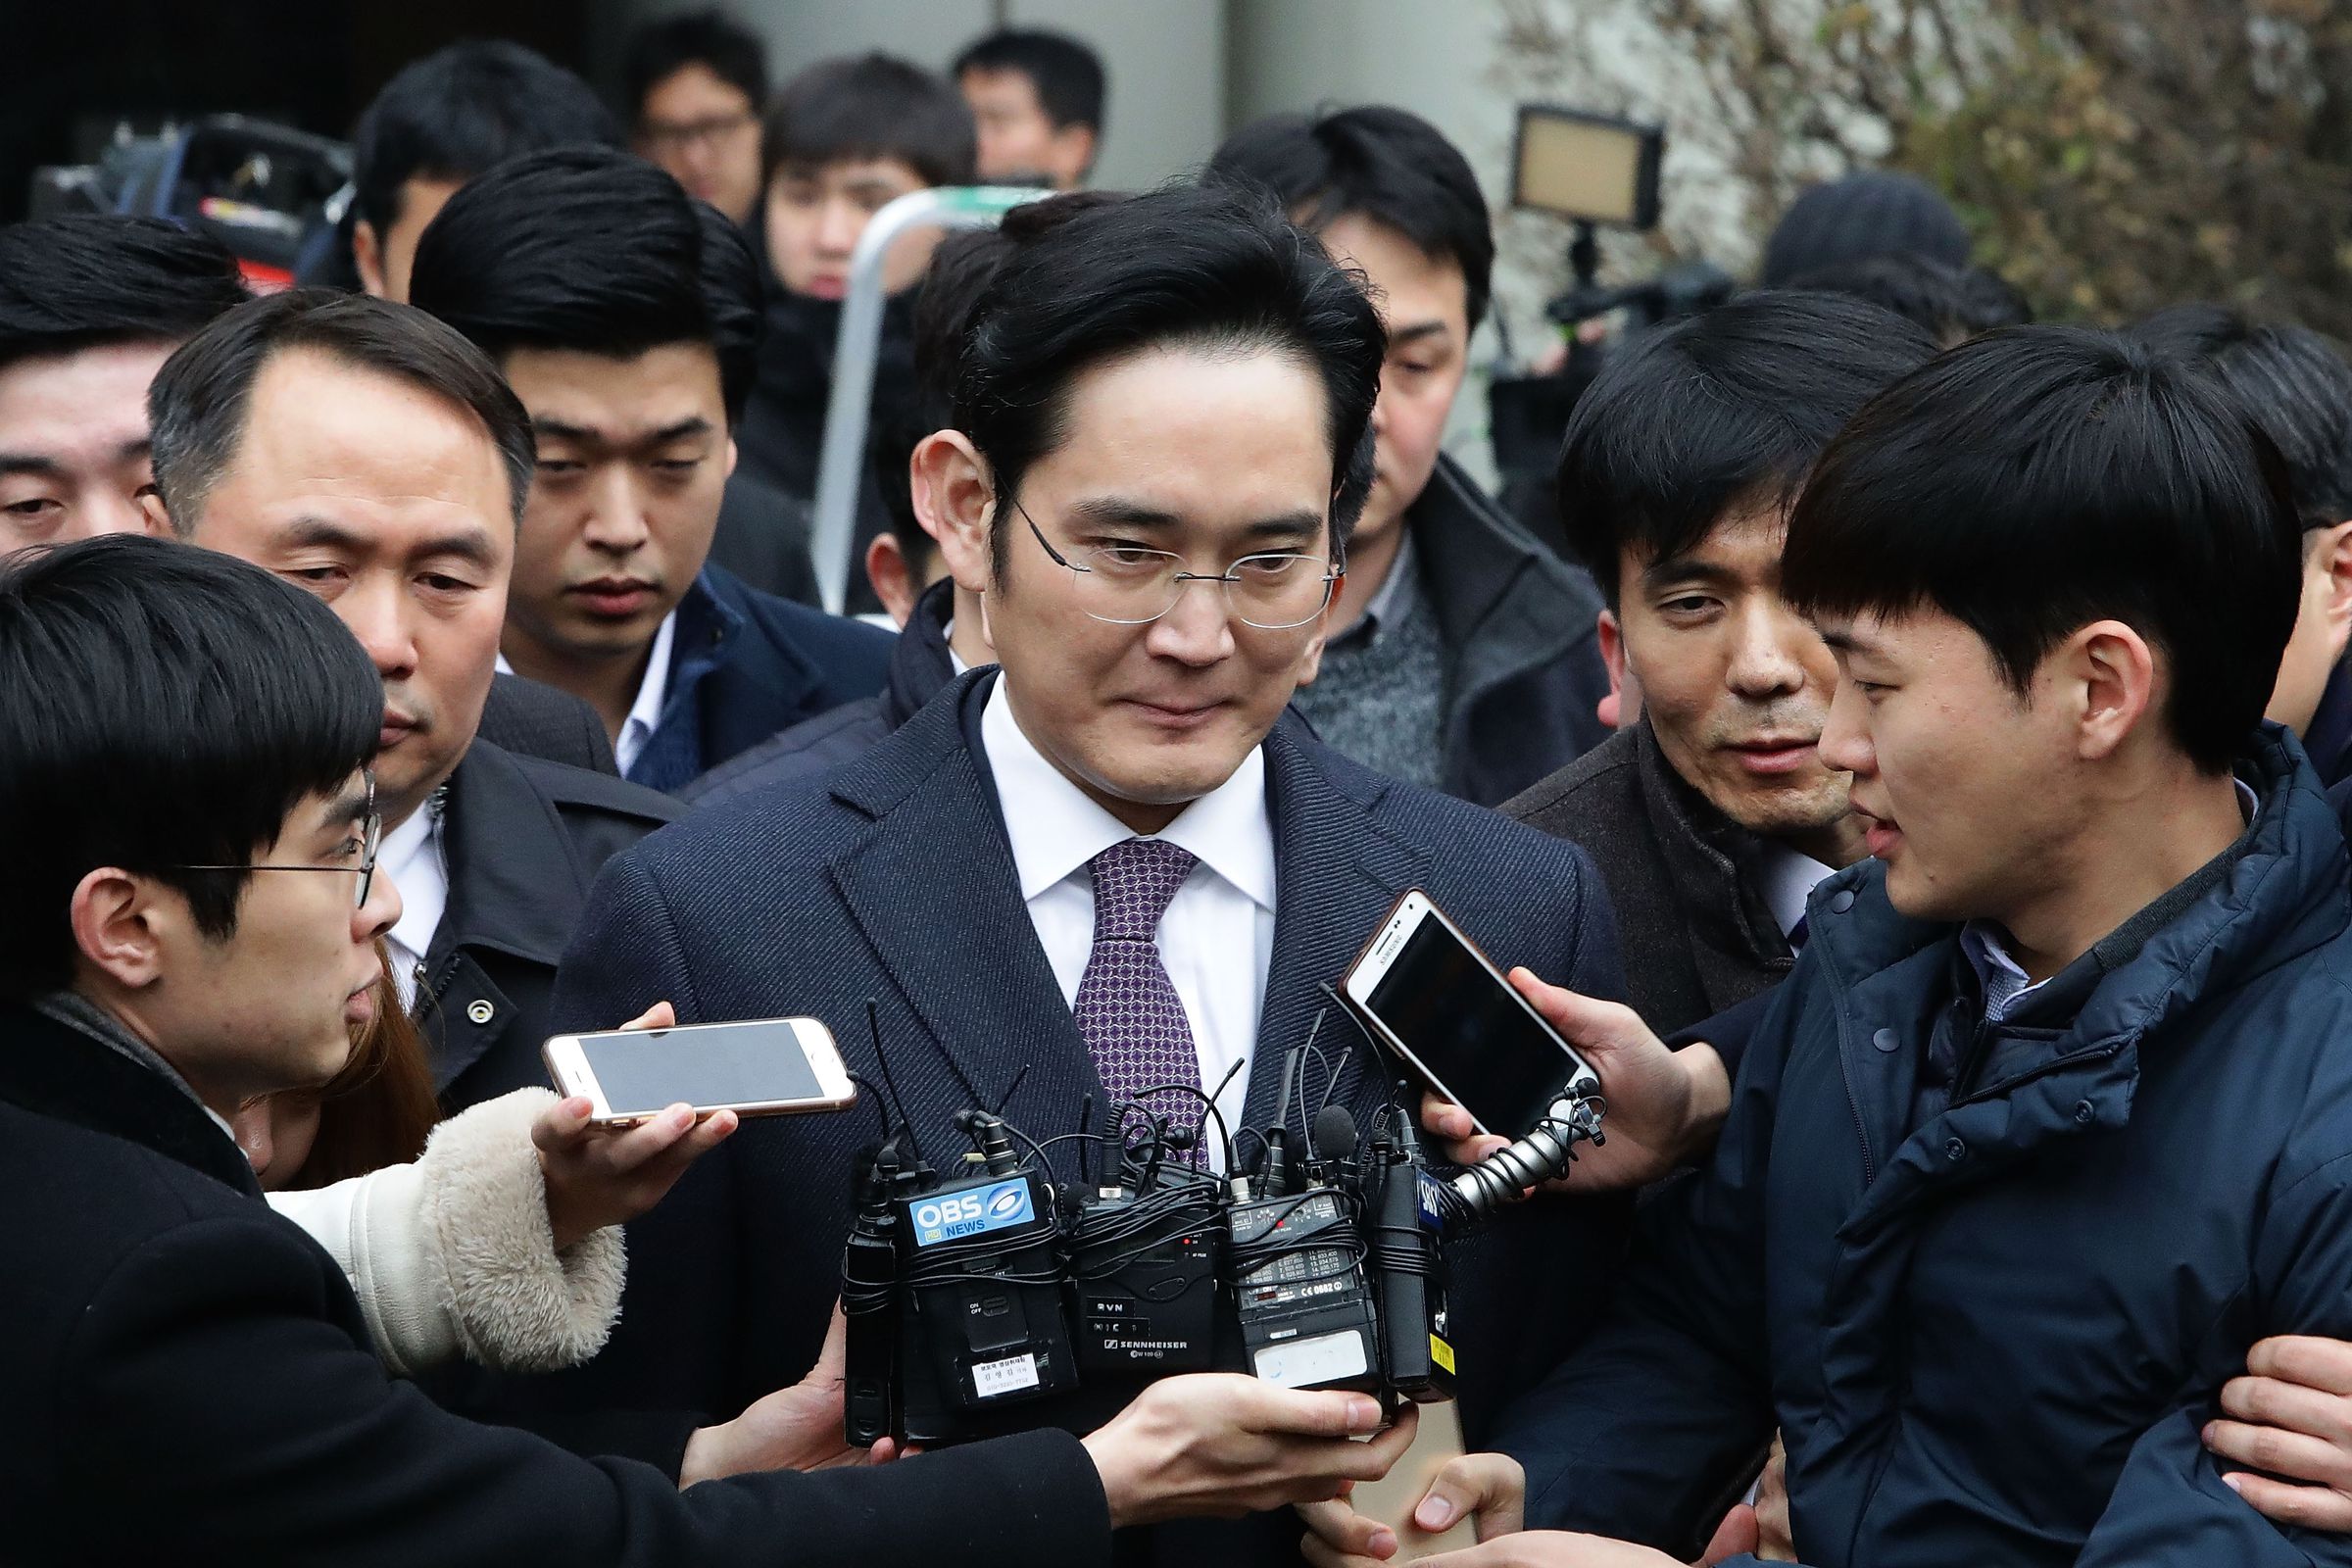 SEOUL, SOUTH KOREA - JANUARY 18: Lee Jae-Yong, vice chairman of Samsung, leaves after attending a court hearing at the Seoul Central District Court on January 18, 2017 in Seoul, South Korea. An arrest warrant for issued for Lee, Samsung's de facto leader,